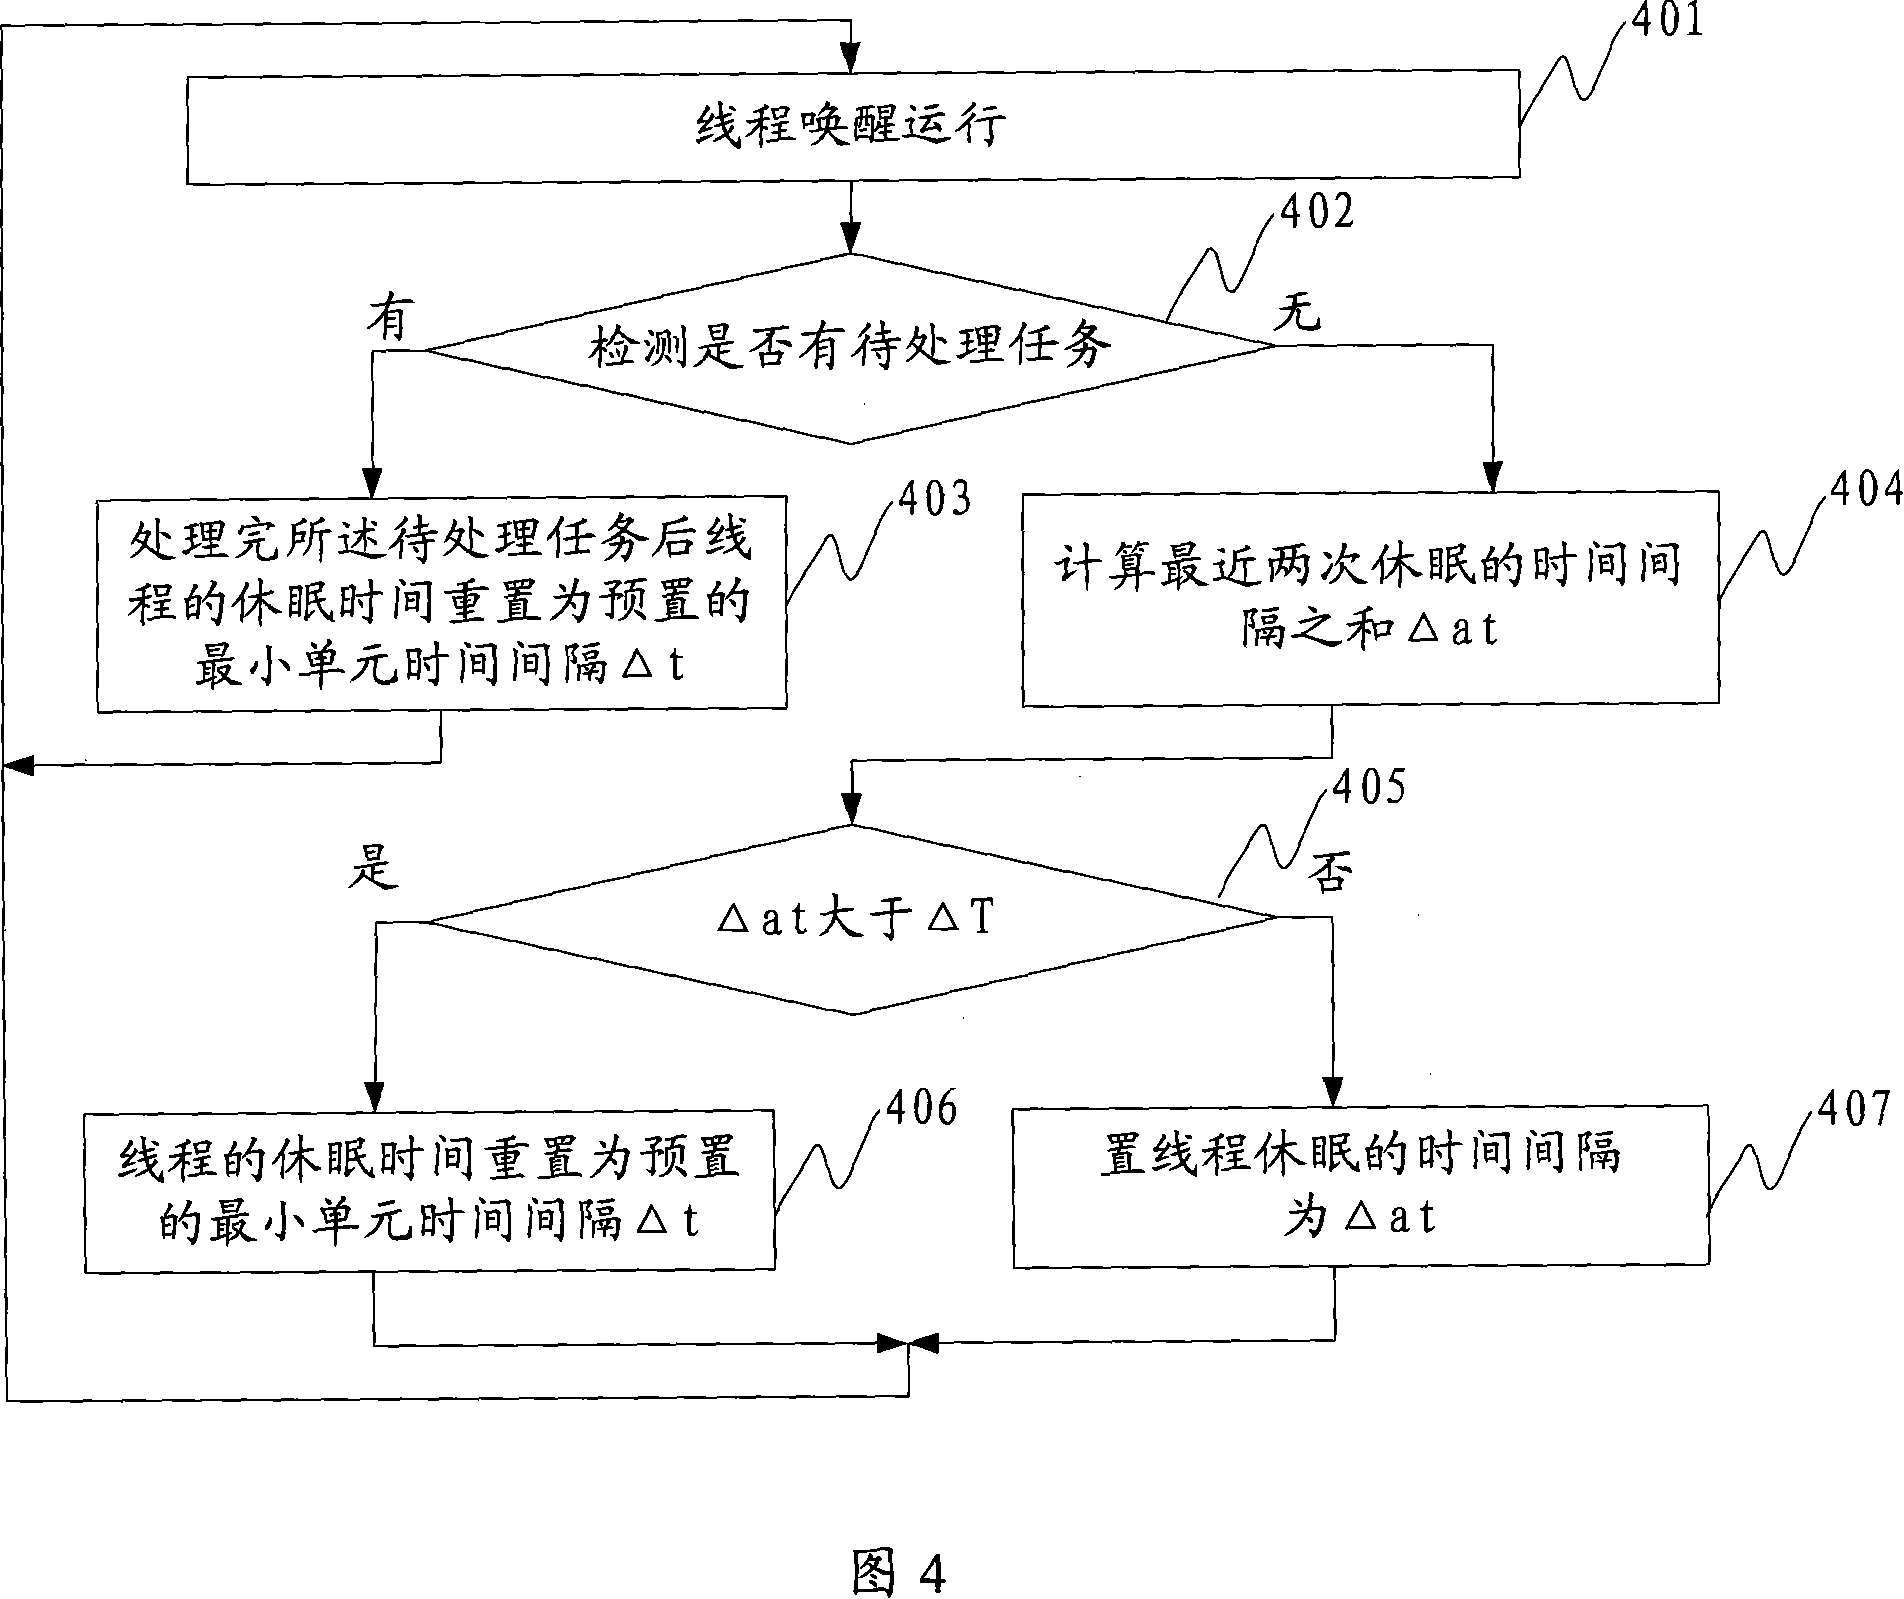 Thread wakening control systems and method